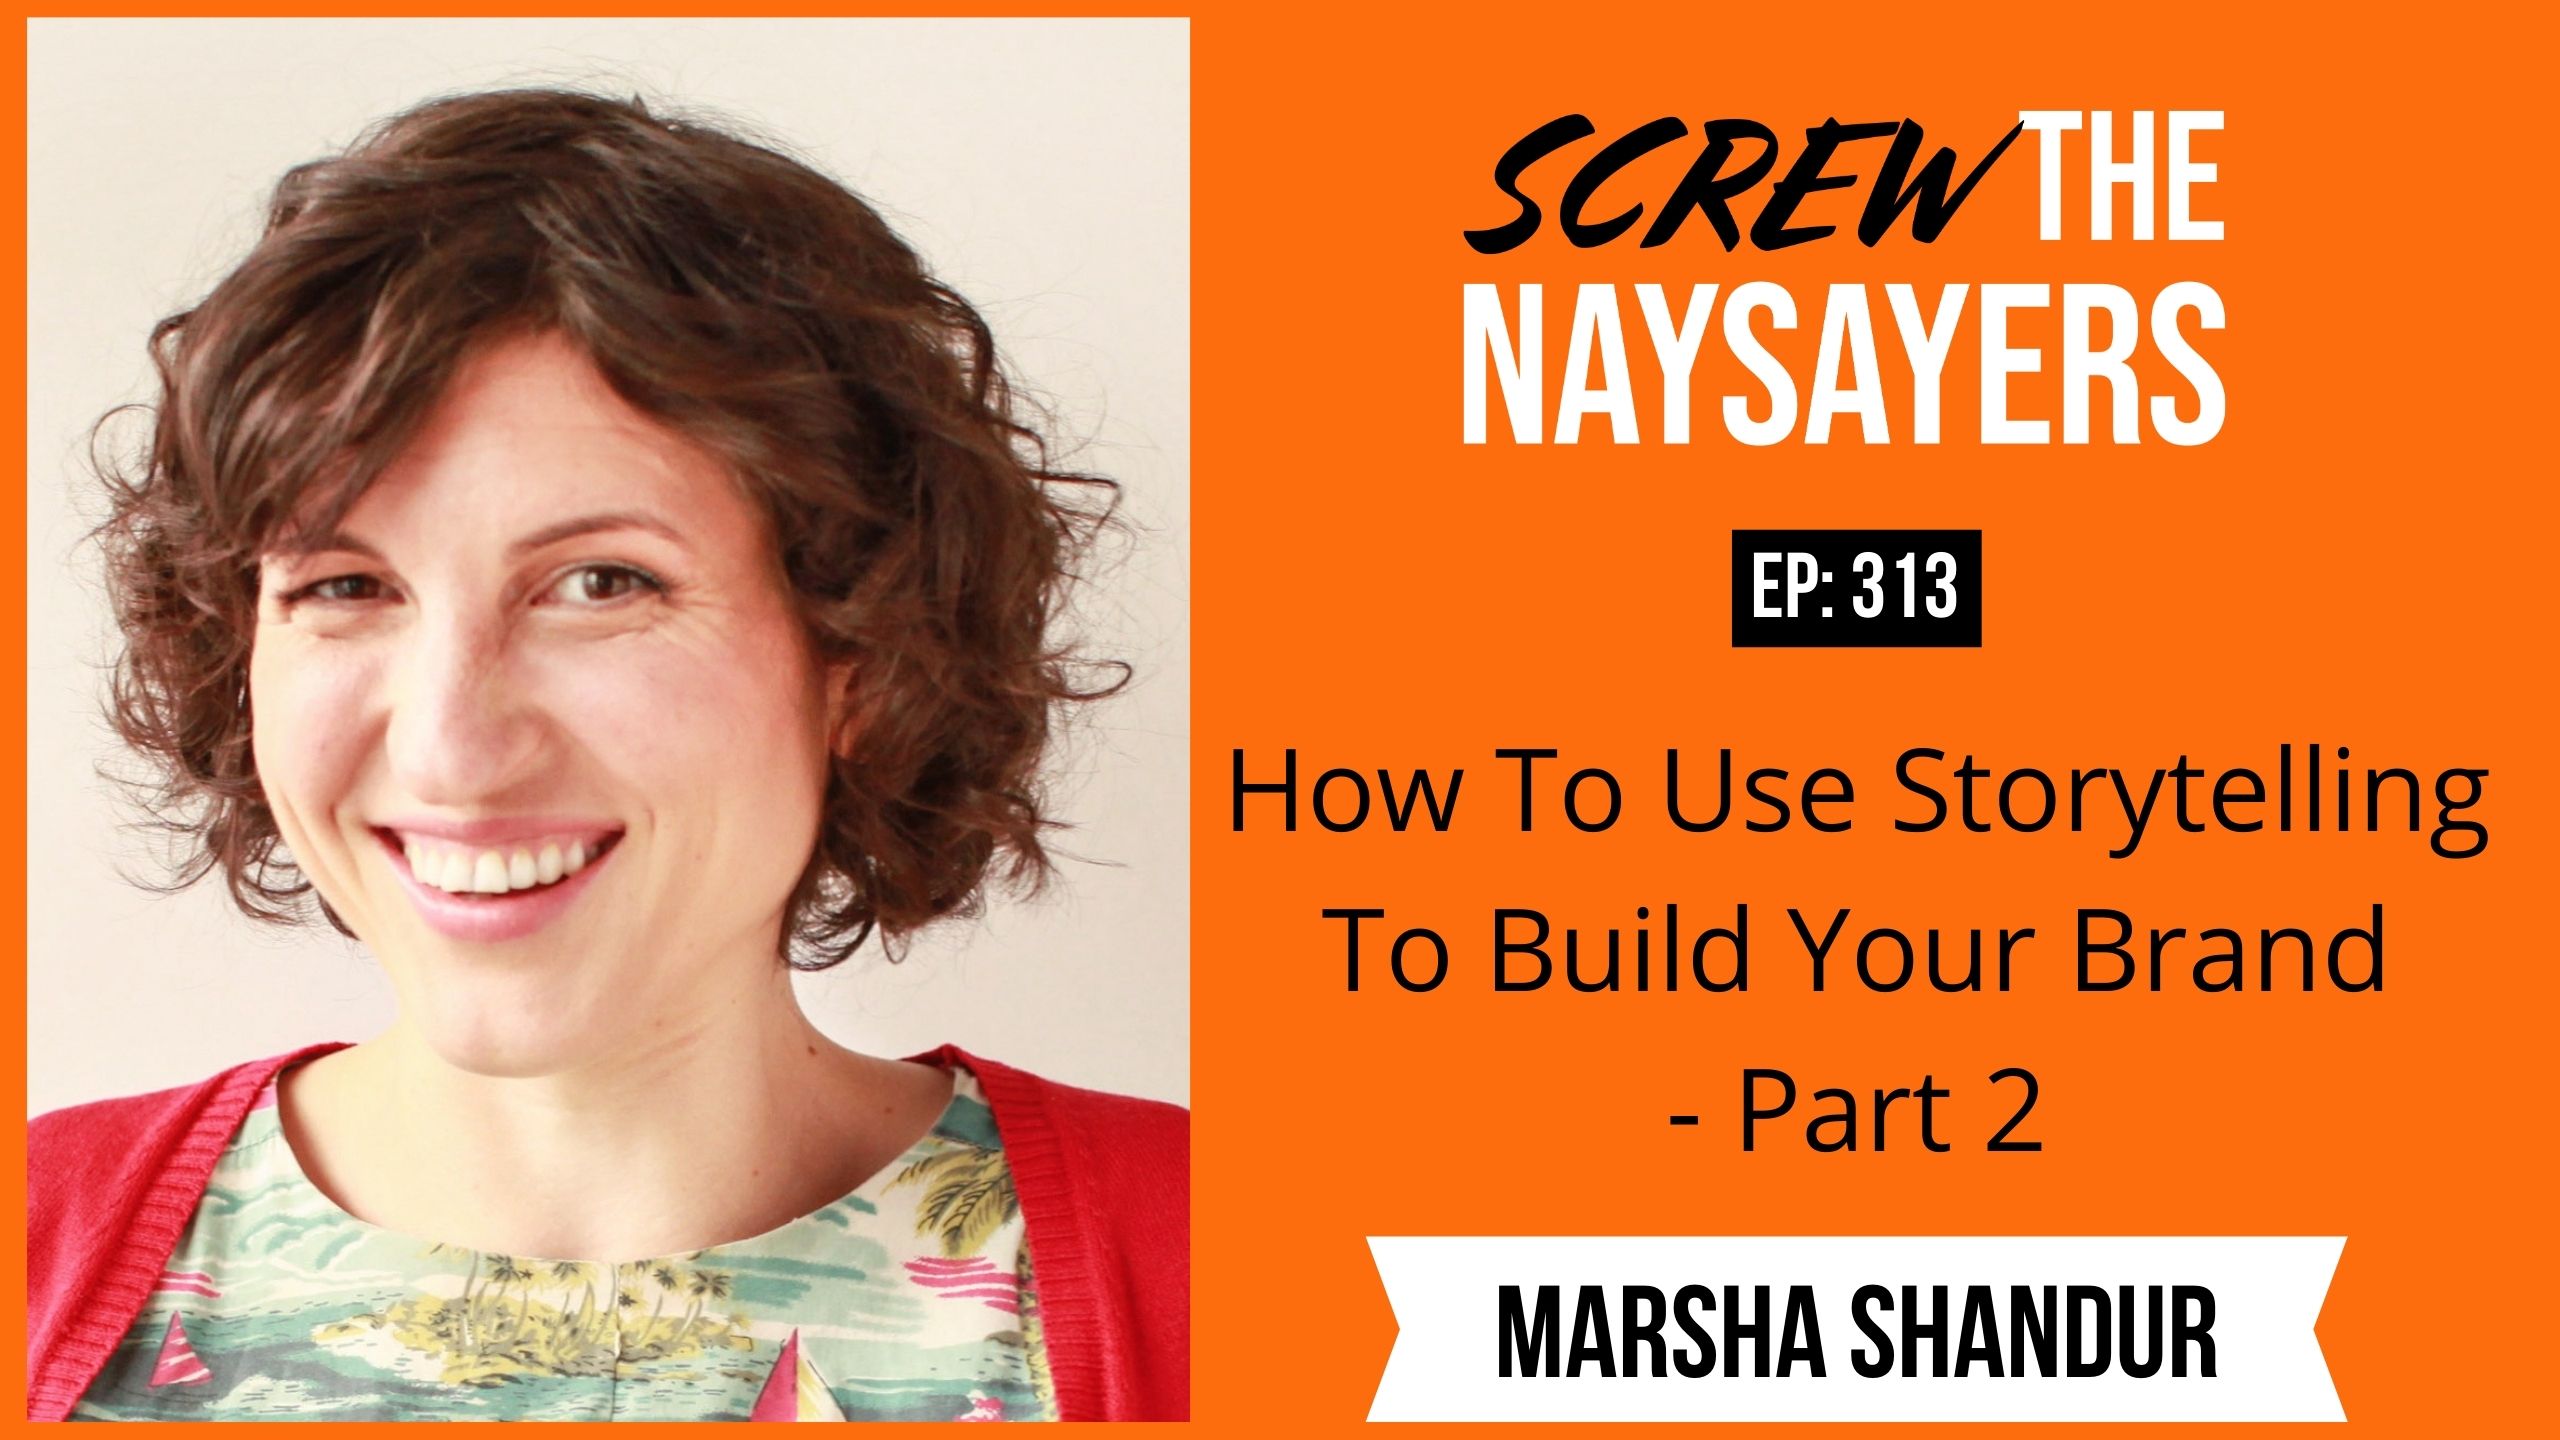 How To Use Storytelling To Build Your Brand | Marsha Shandur - Part 2